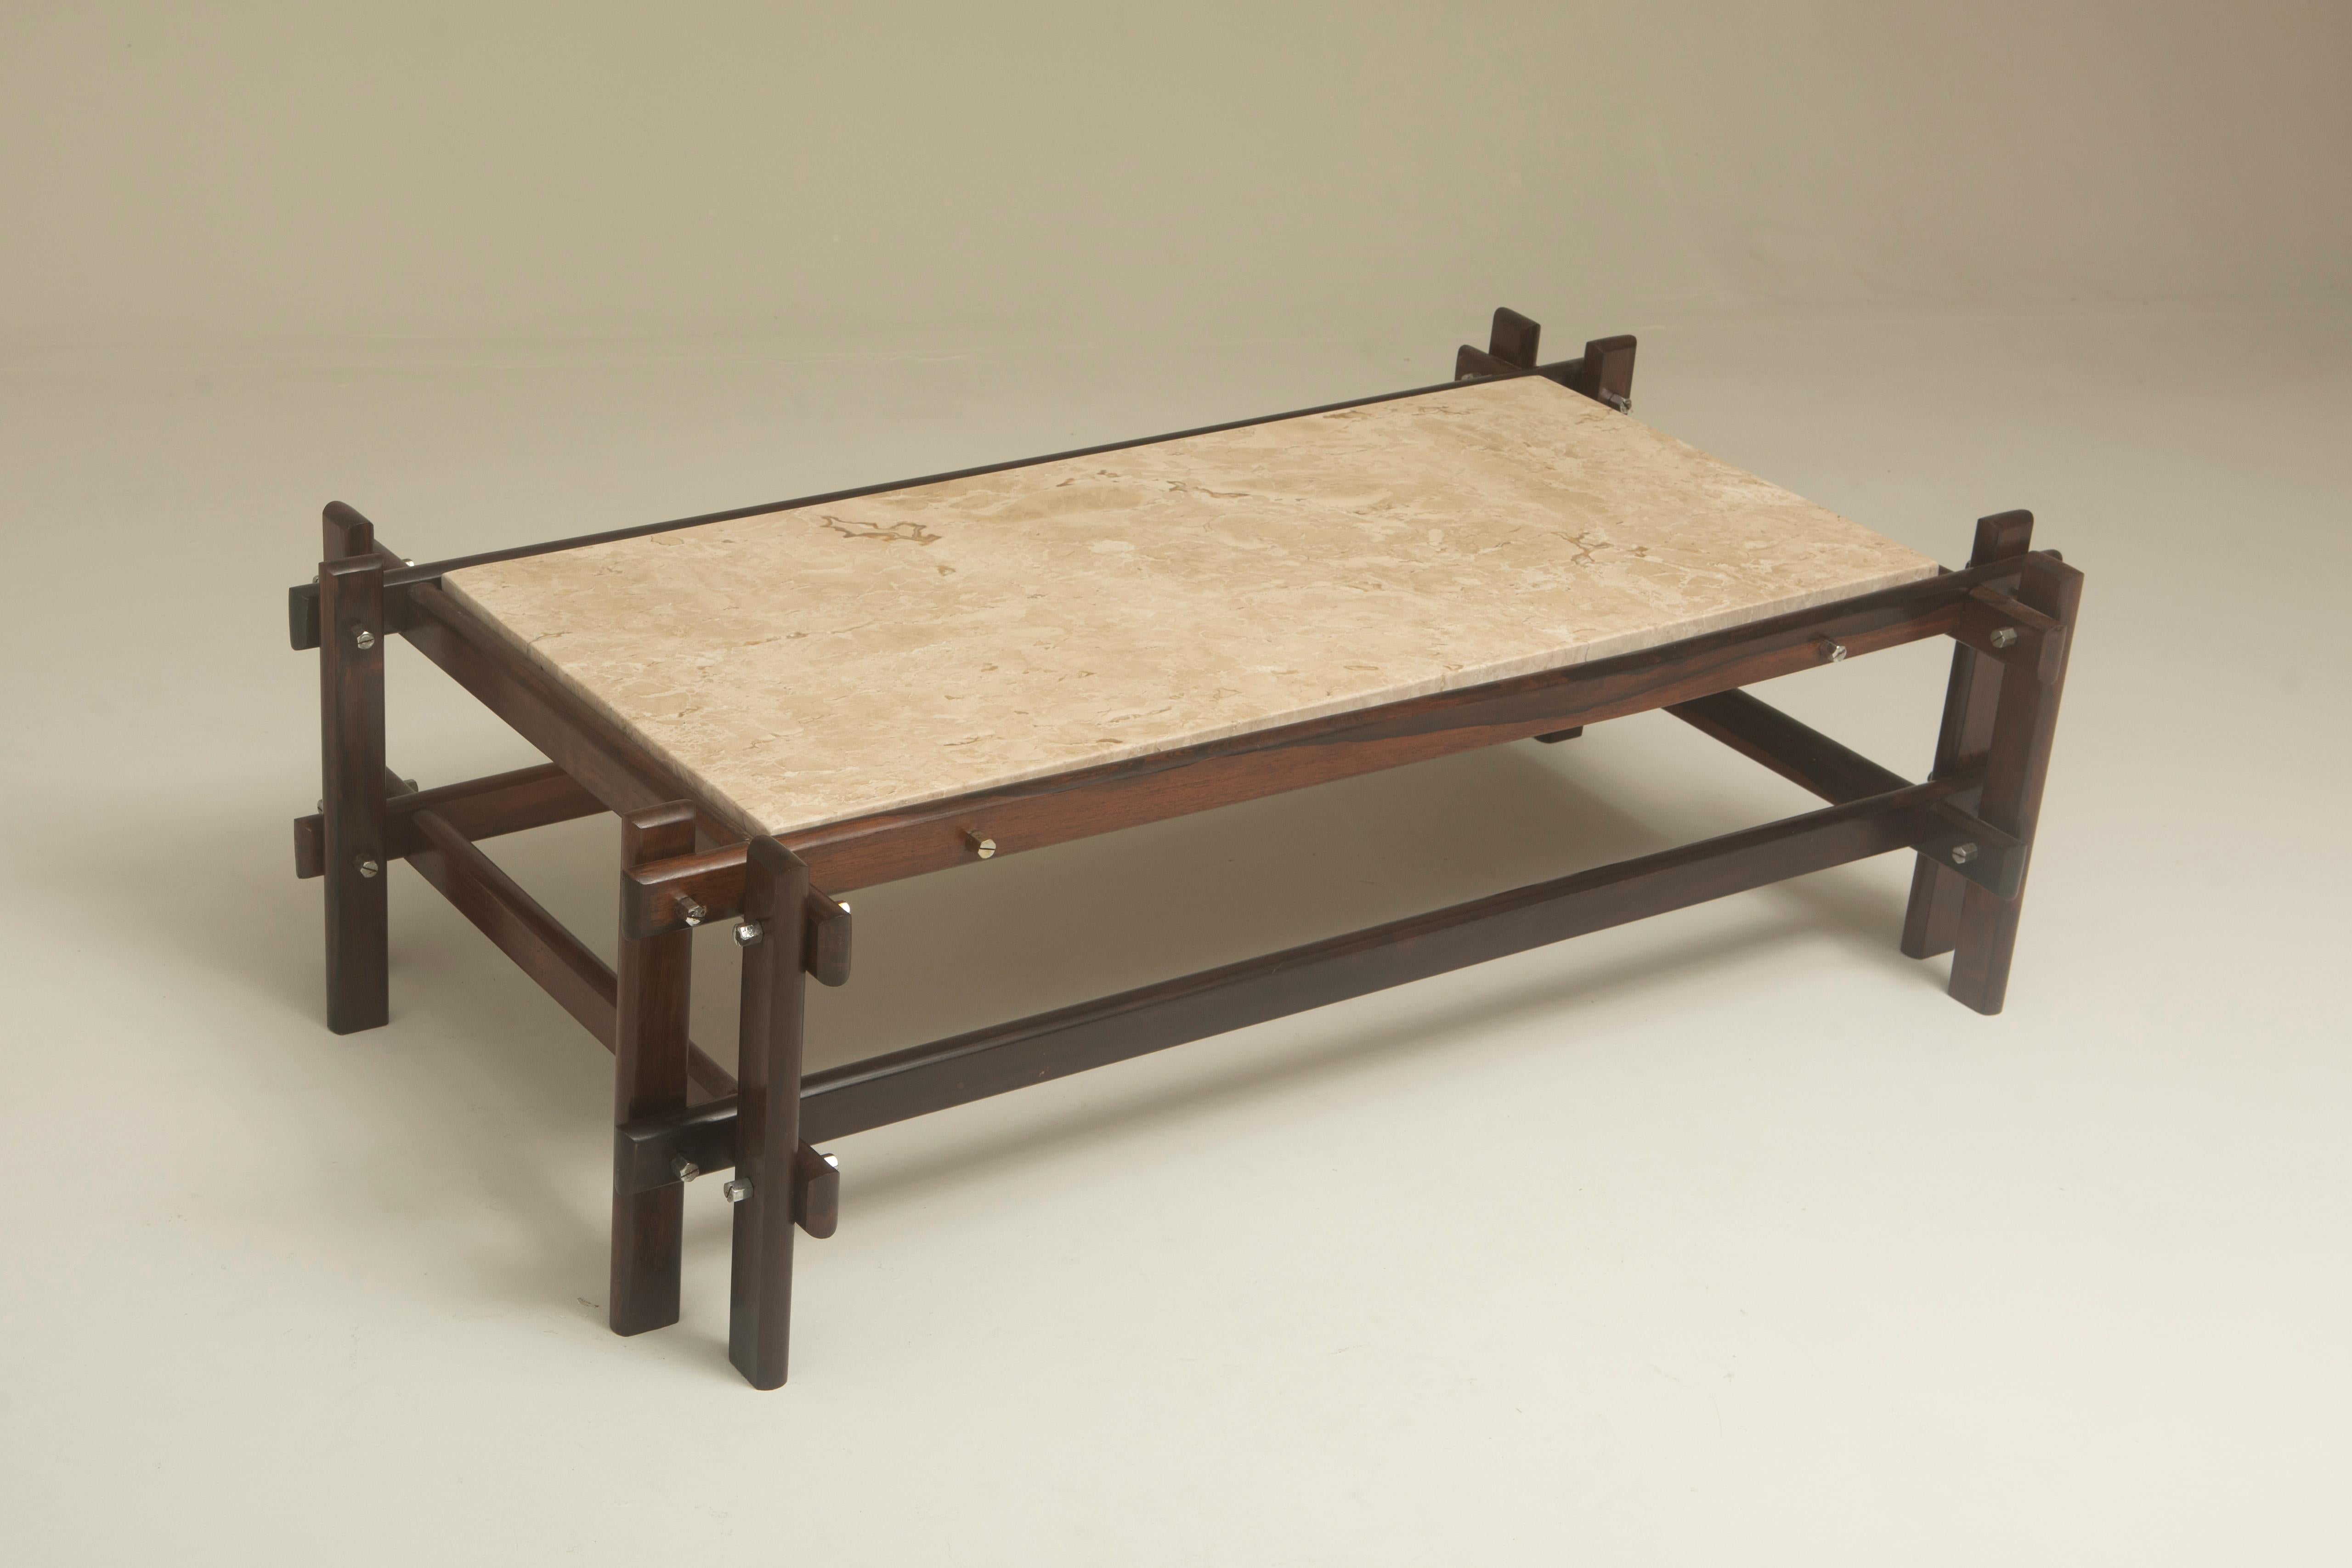 Mid-Century Modern Center Table by Brazilian Designer, 1970s

Center table structured with solid wooden slats, with metal details and marble top, manufactured by Unknown Brazilian Designer, circa 1960.